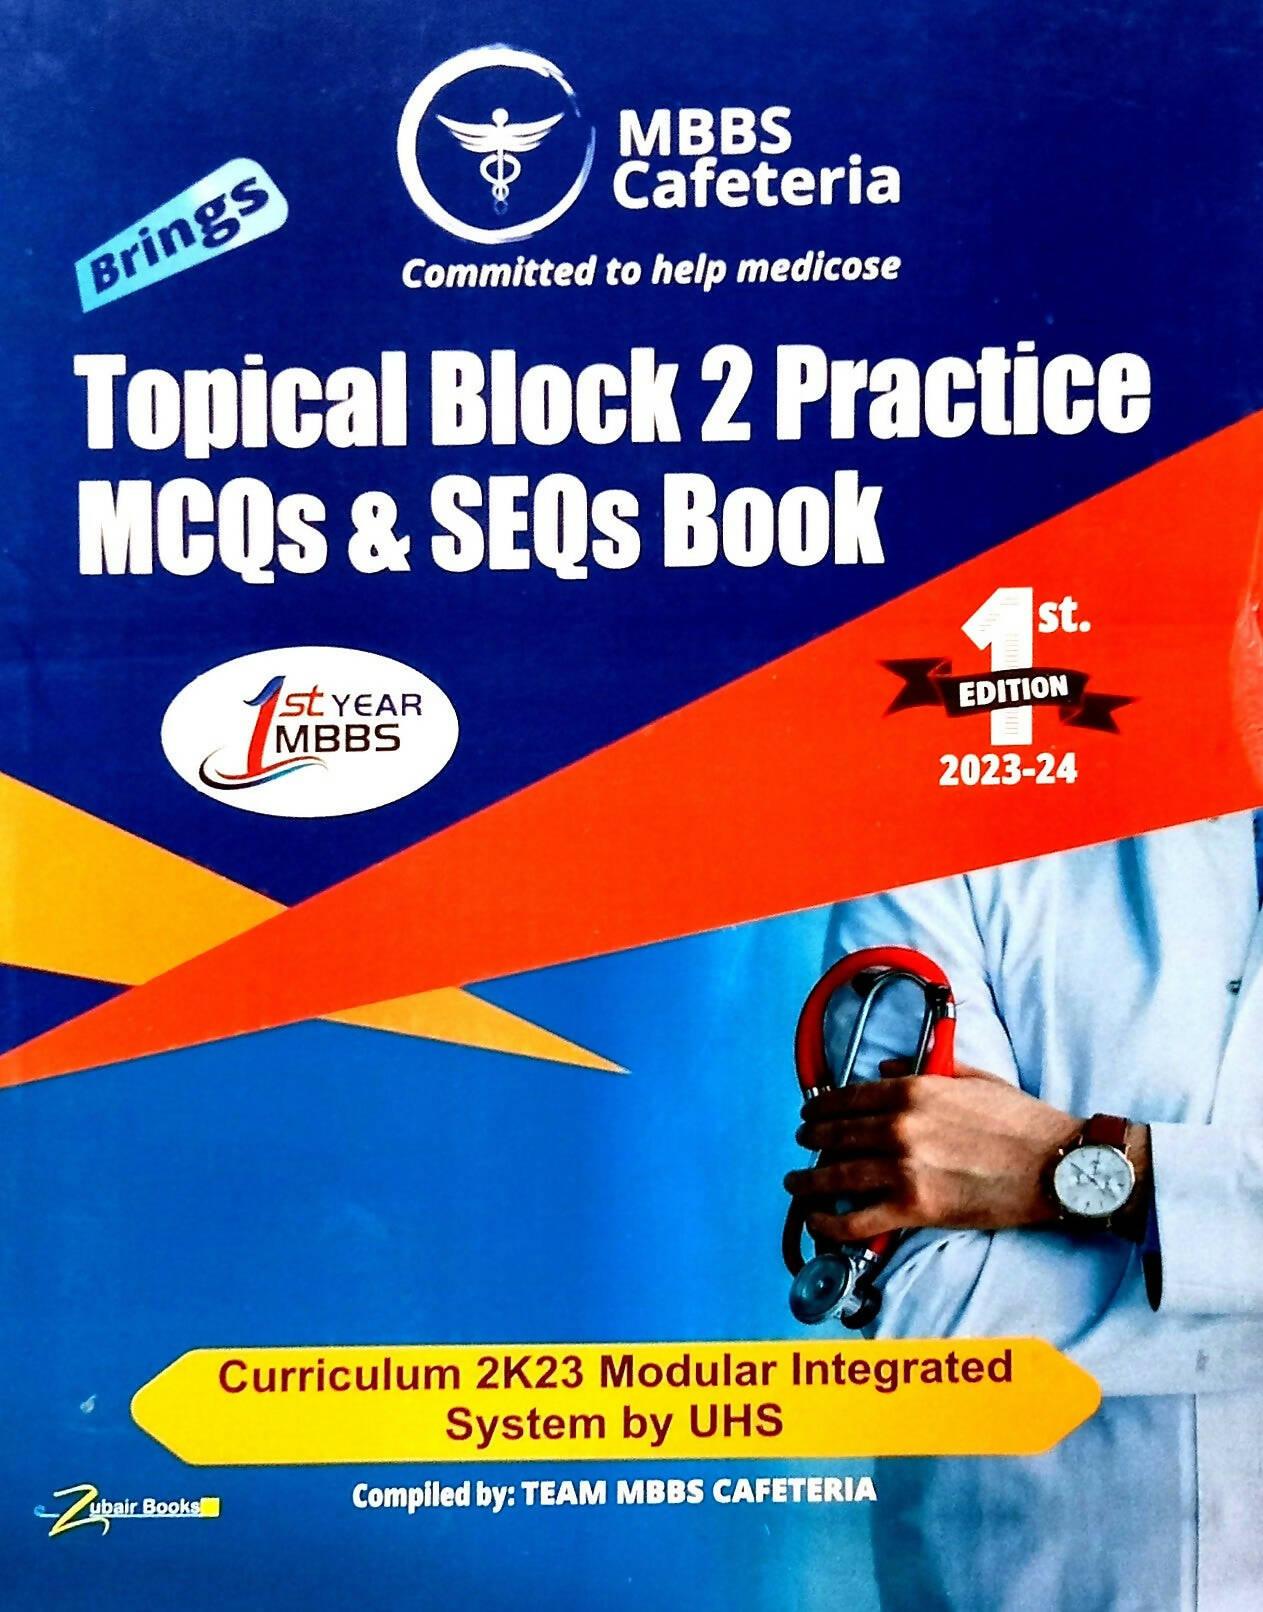 MBBS CAFETARIA 1ST YEAR MBBS TOPICAL BLOCK 2 PRACTICE MCQS & SEQS BOOK - ValueBox